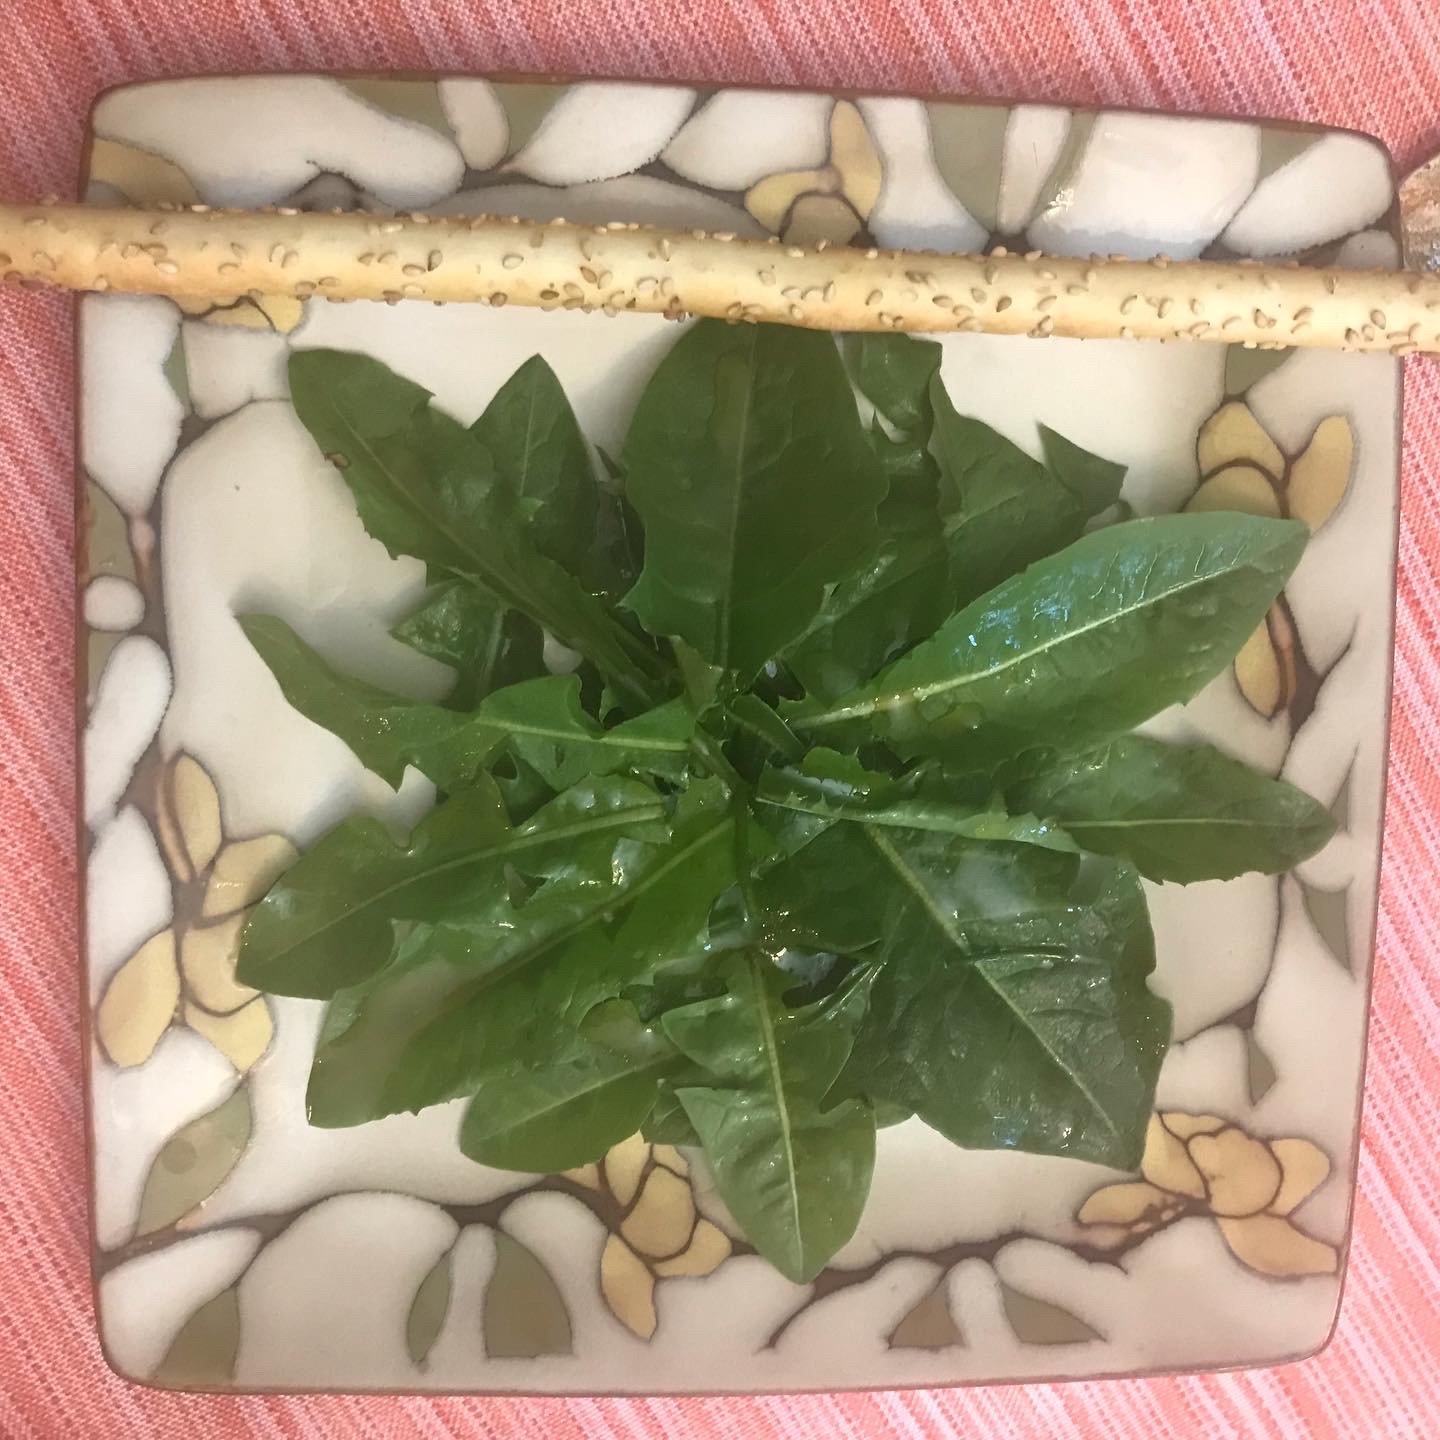 Dandelion salad with a simple red wine and chive vinaigrette arranged on a plate in a starburst pattern like a composed salad, served with a breadstick.